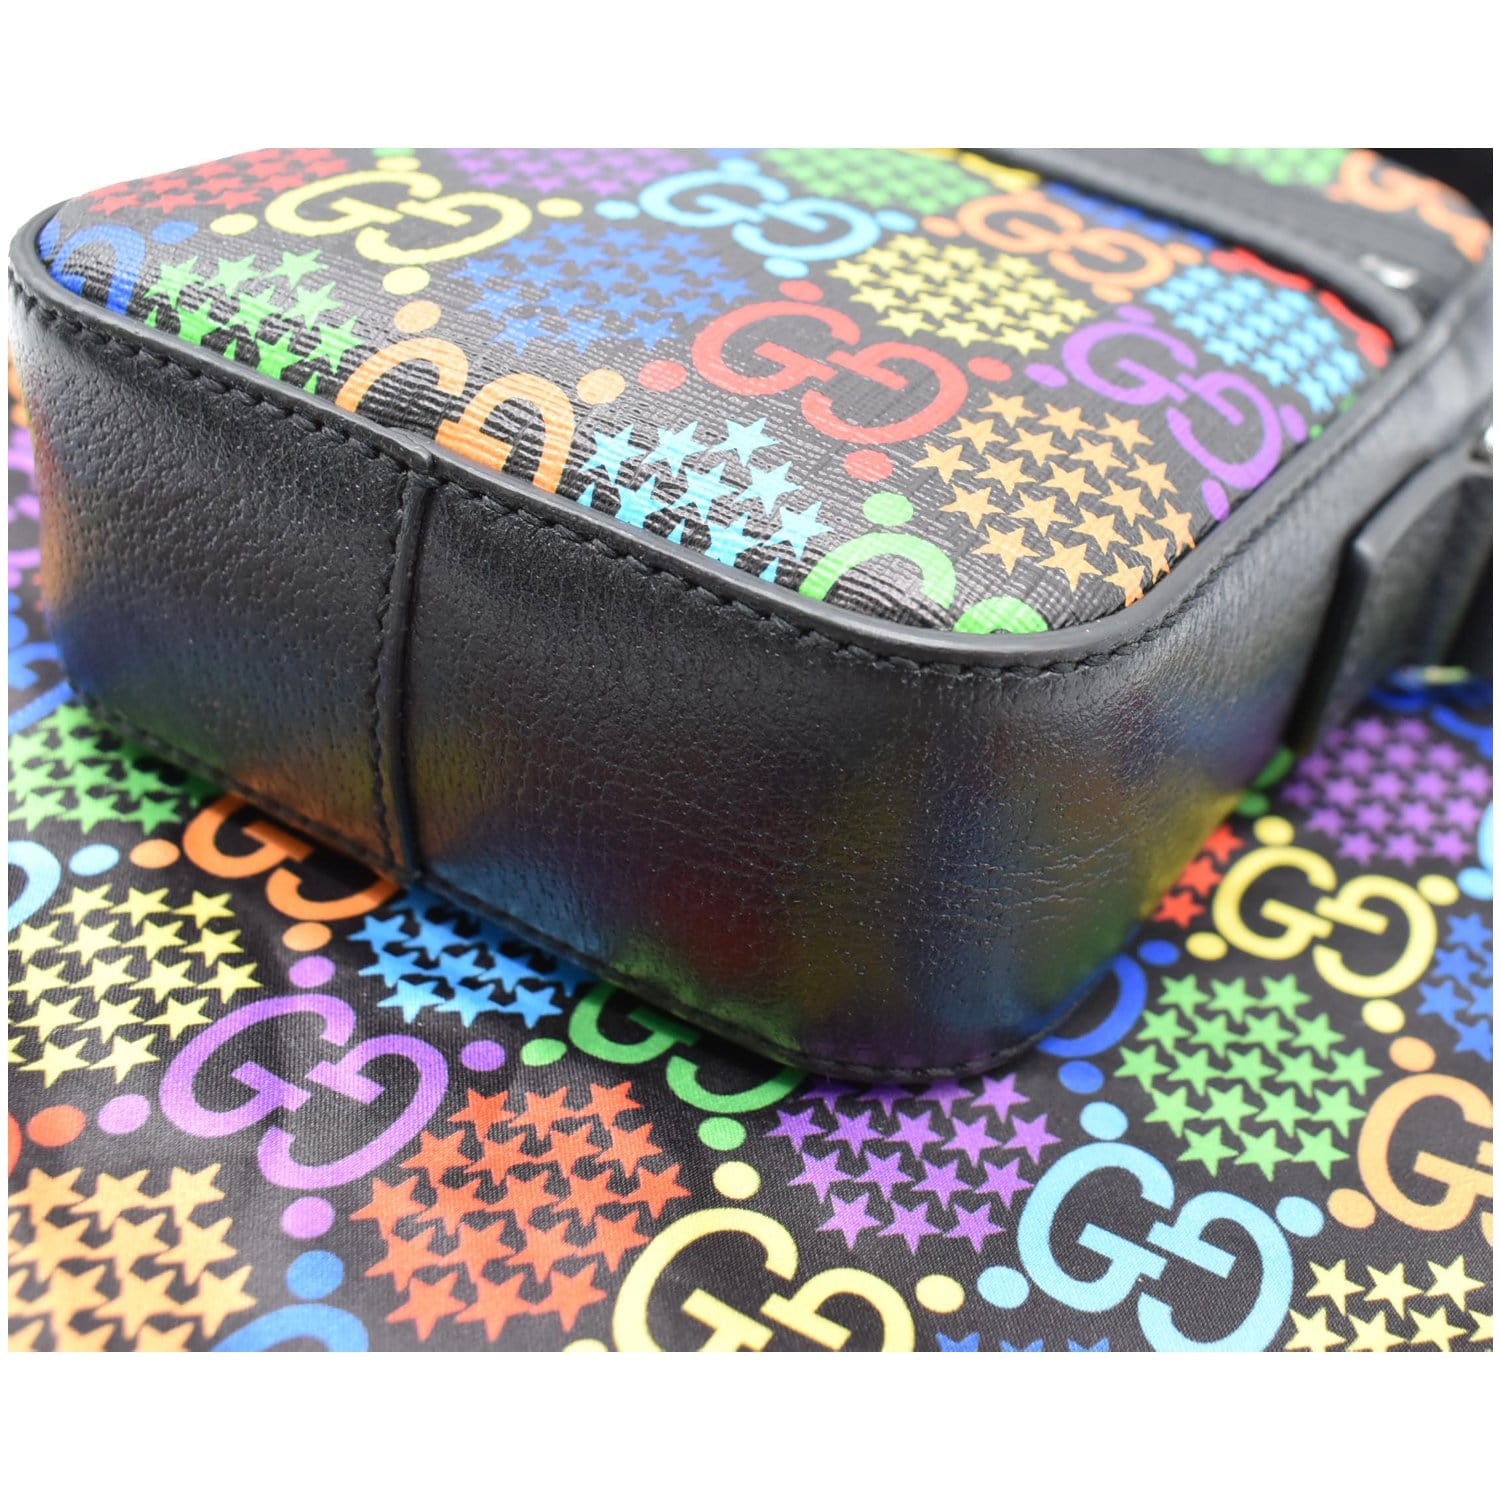 Authenticated used Gucci Gucci GG Psychedelic Bucket Bag Shoulder 598149 PVC Leather Black Multicolor Pink Drawstring, Adult Unisex, Size: (HxWxD)